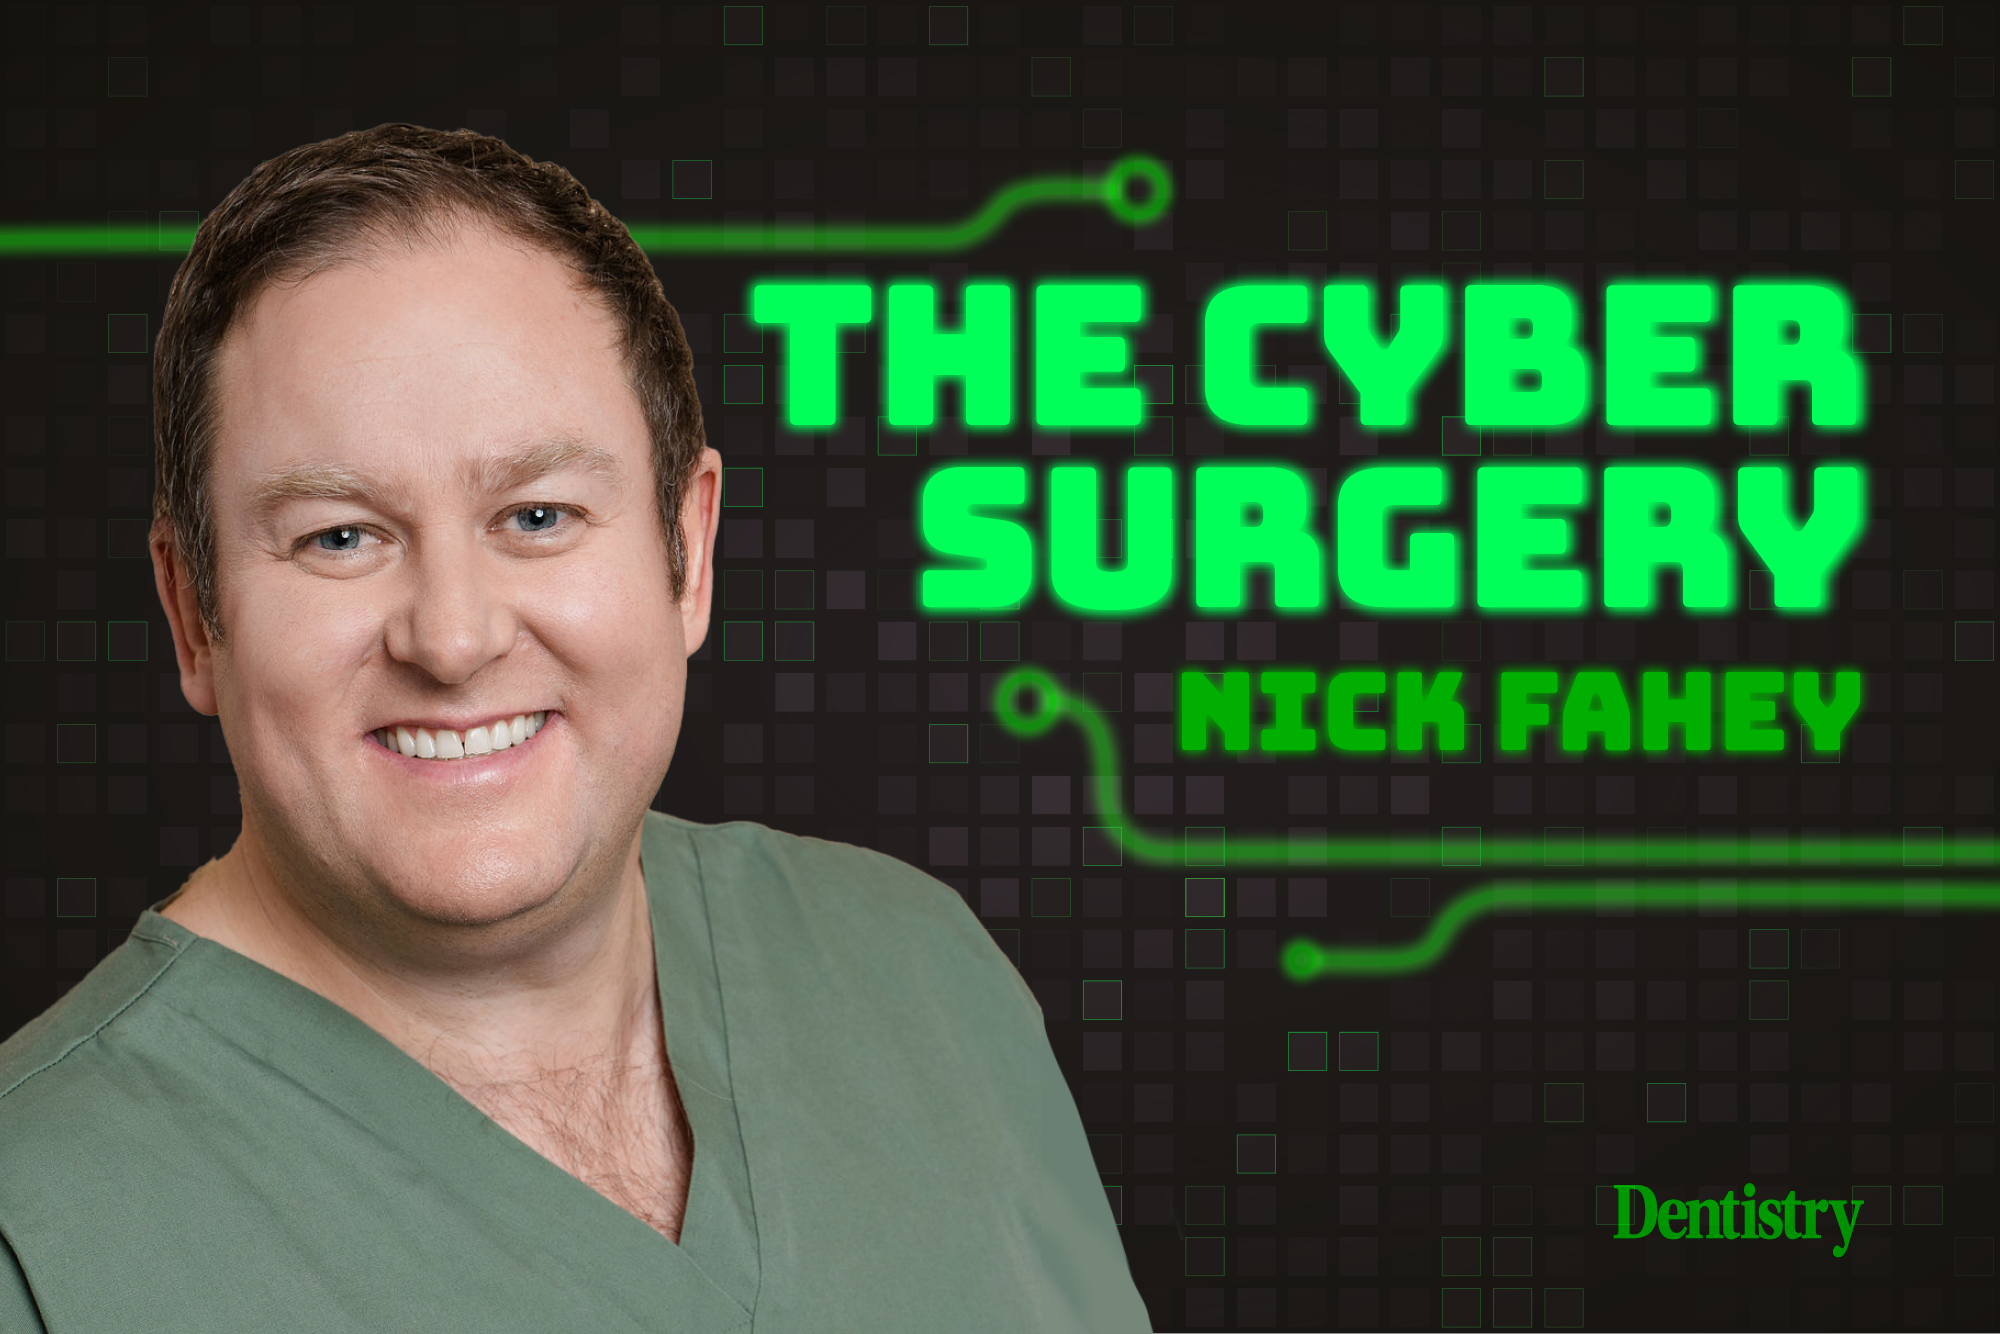 Kicking off the first of his new column, The Cyber Surgery, Nick Fahey discusses the start of his journey with digital dentistry and how the 90s rave scene fuelled his aspirations in the profession.